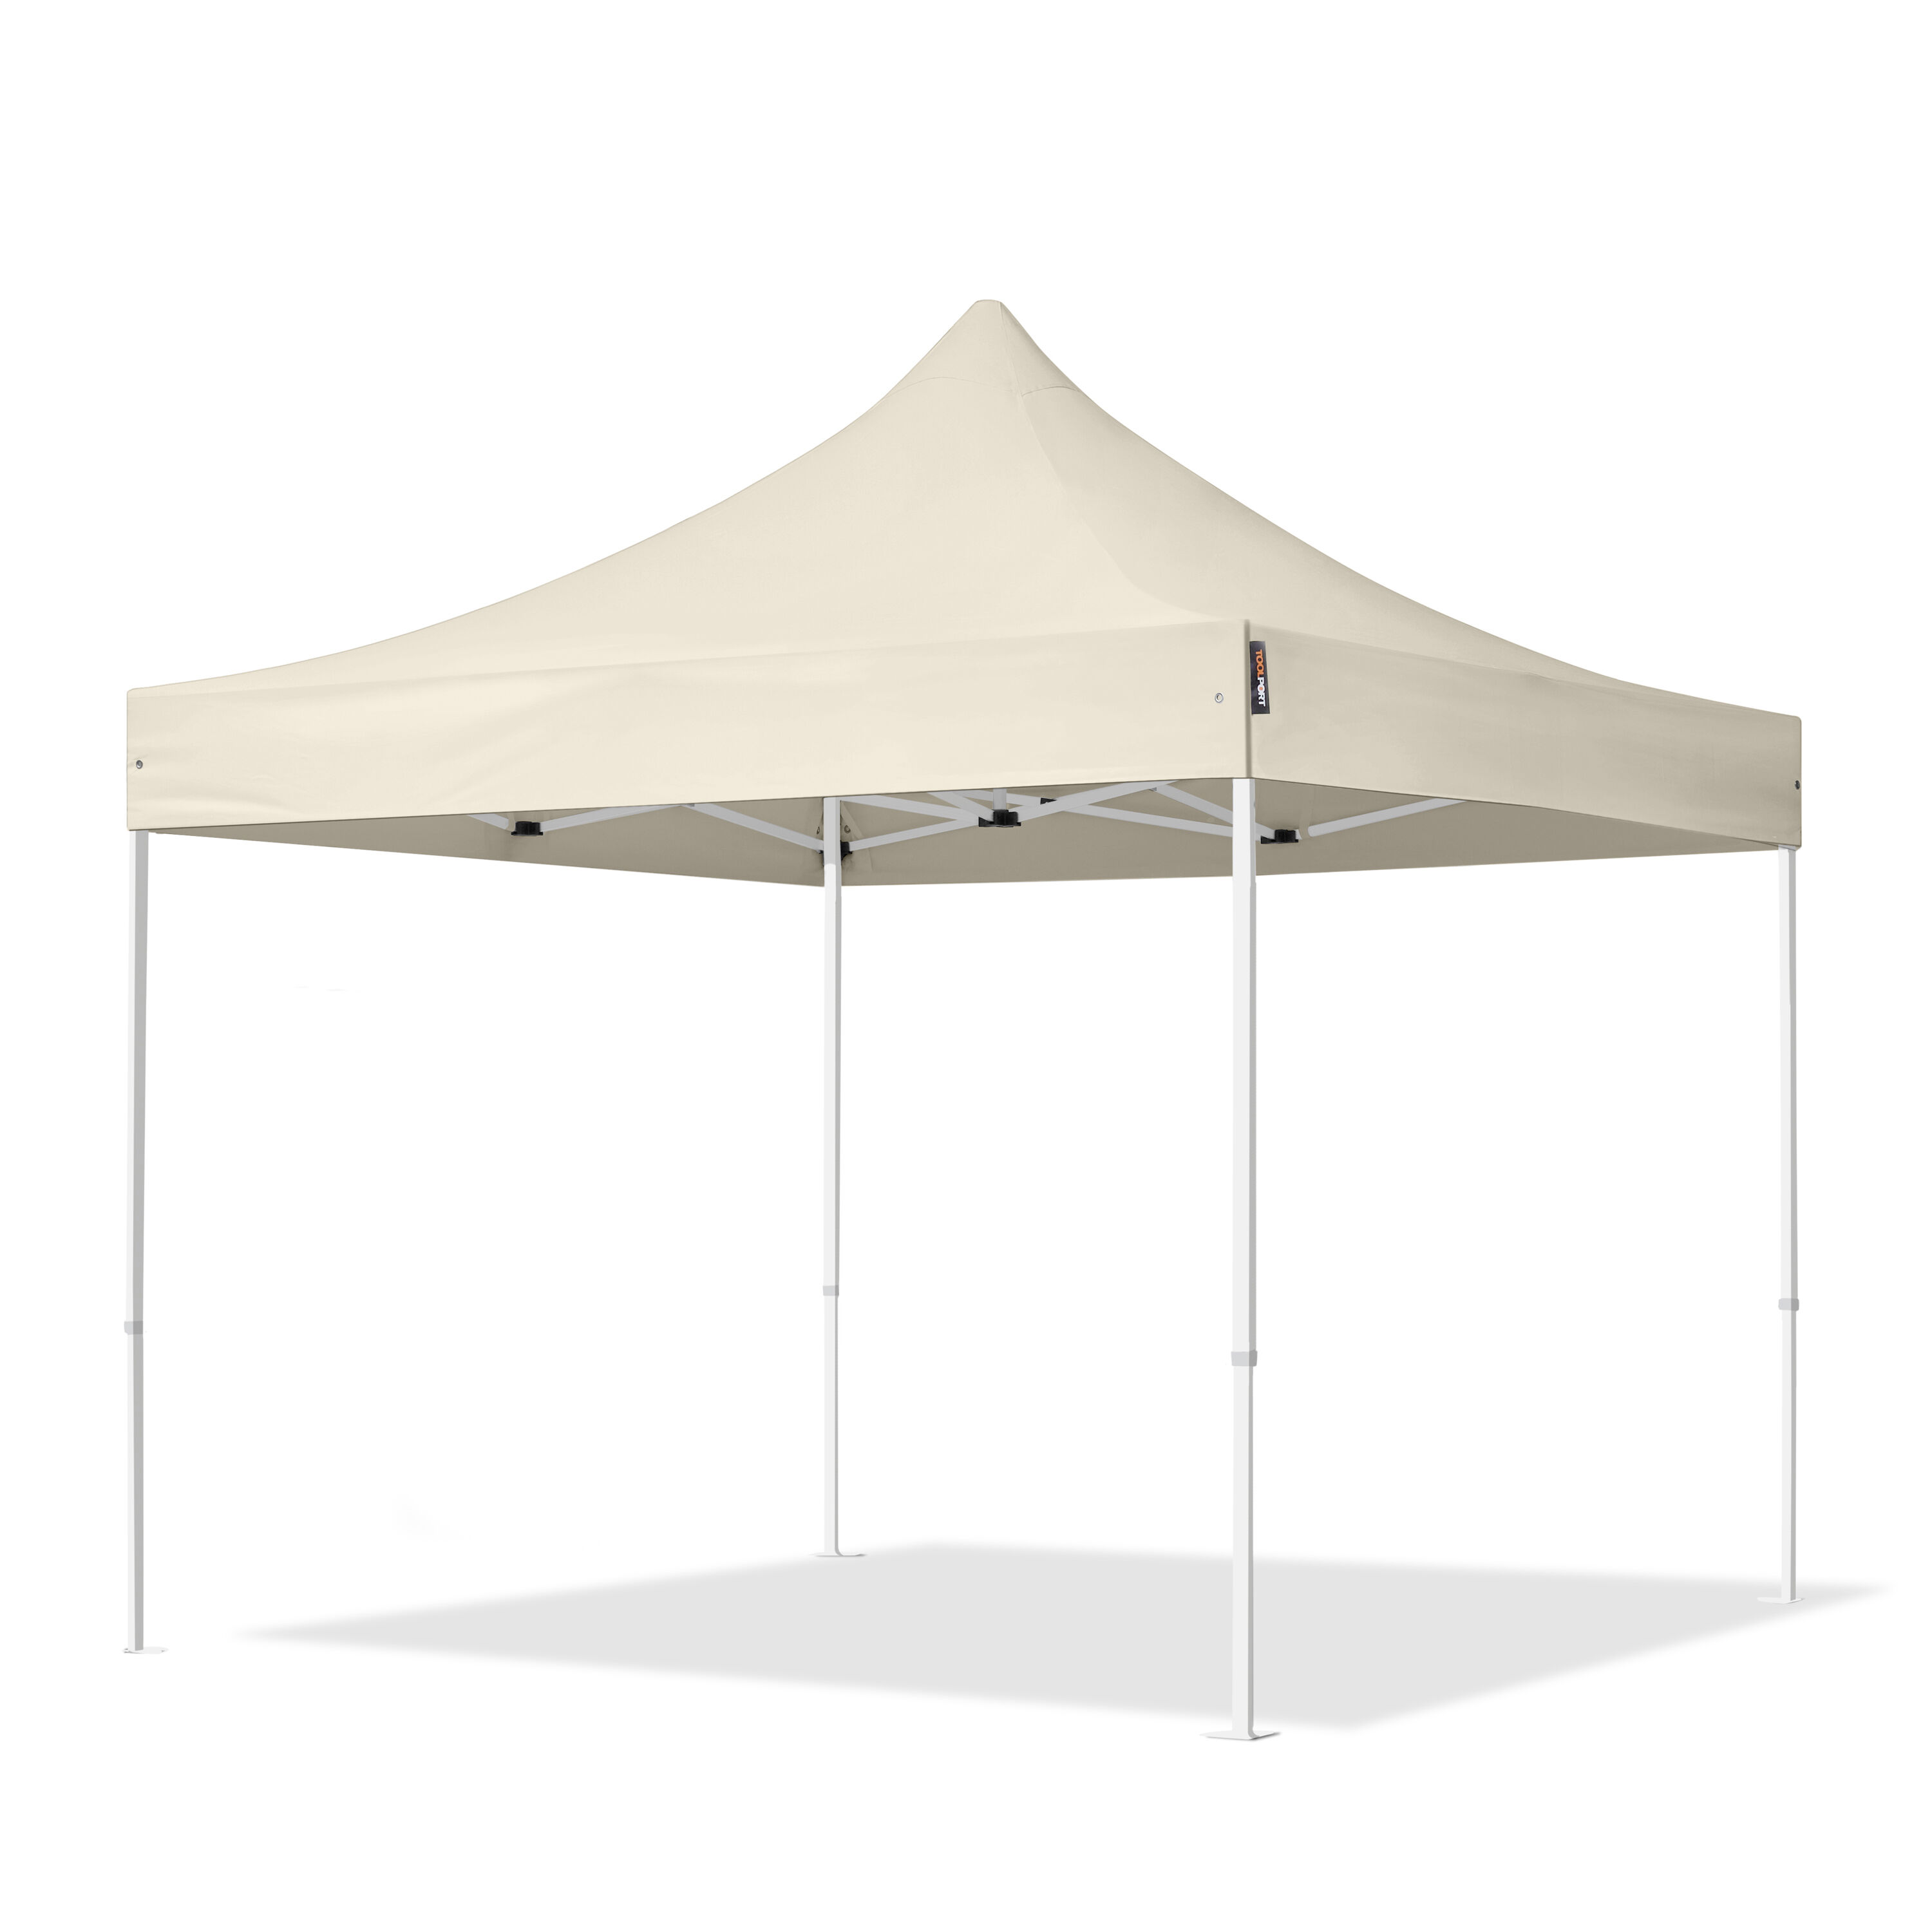 TOOLPORT Easy up Partytent 3x3m Hoogwaardig polyester 300 g/m² crème waterdicht Easy Up Tent, Pop Up Partytent, Harmonicatent, Vouwtent